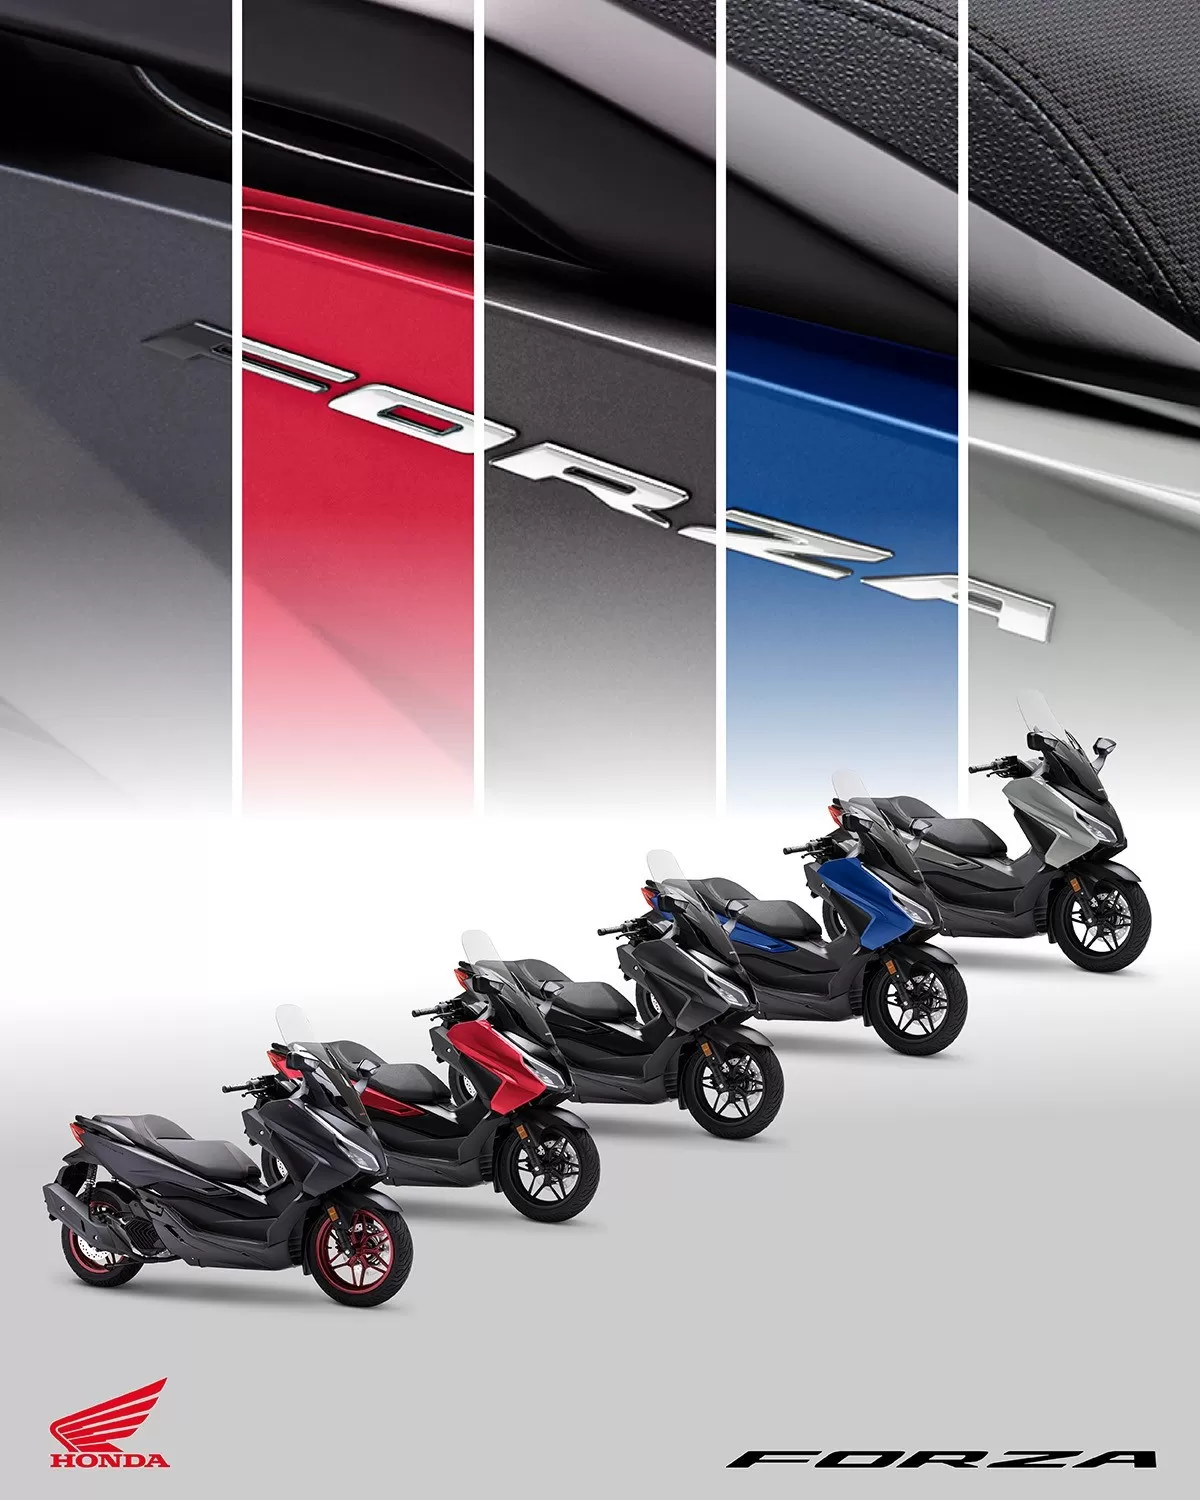 Honda ADV 350, Forza 350 And 125 Get New Colors In Europe